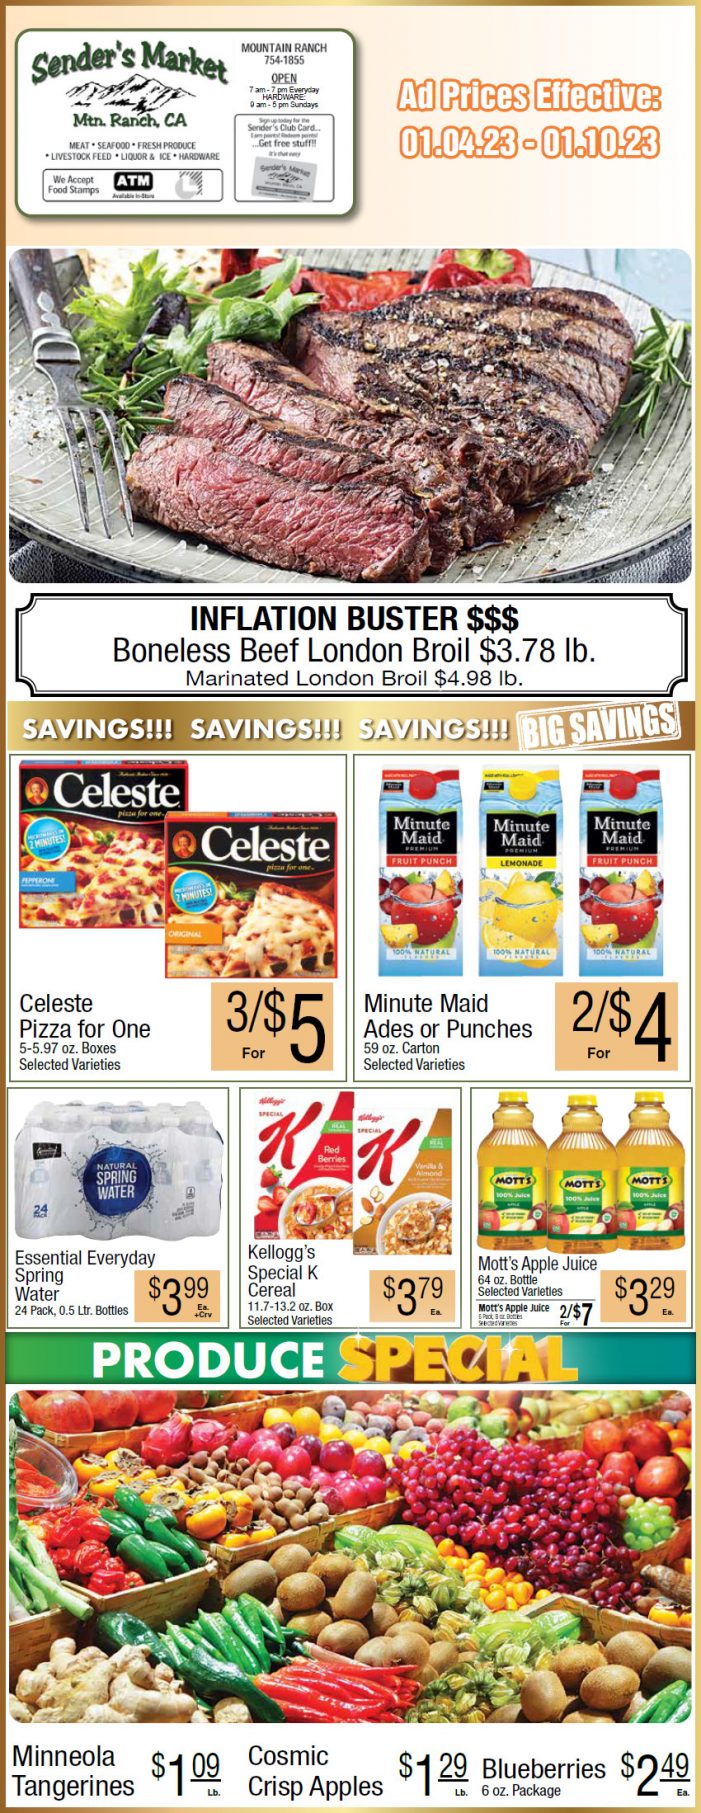 Sender’s Market Weekly Ad & Grocery Specials Jan 4 – 10th! Shop Local & Save!